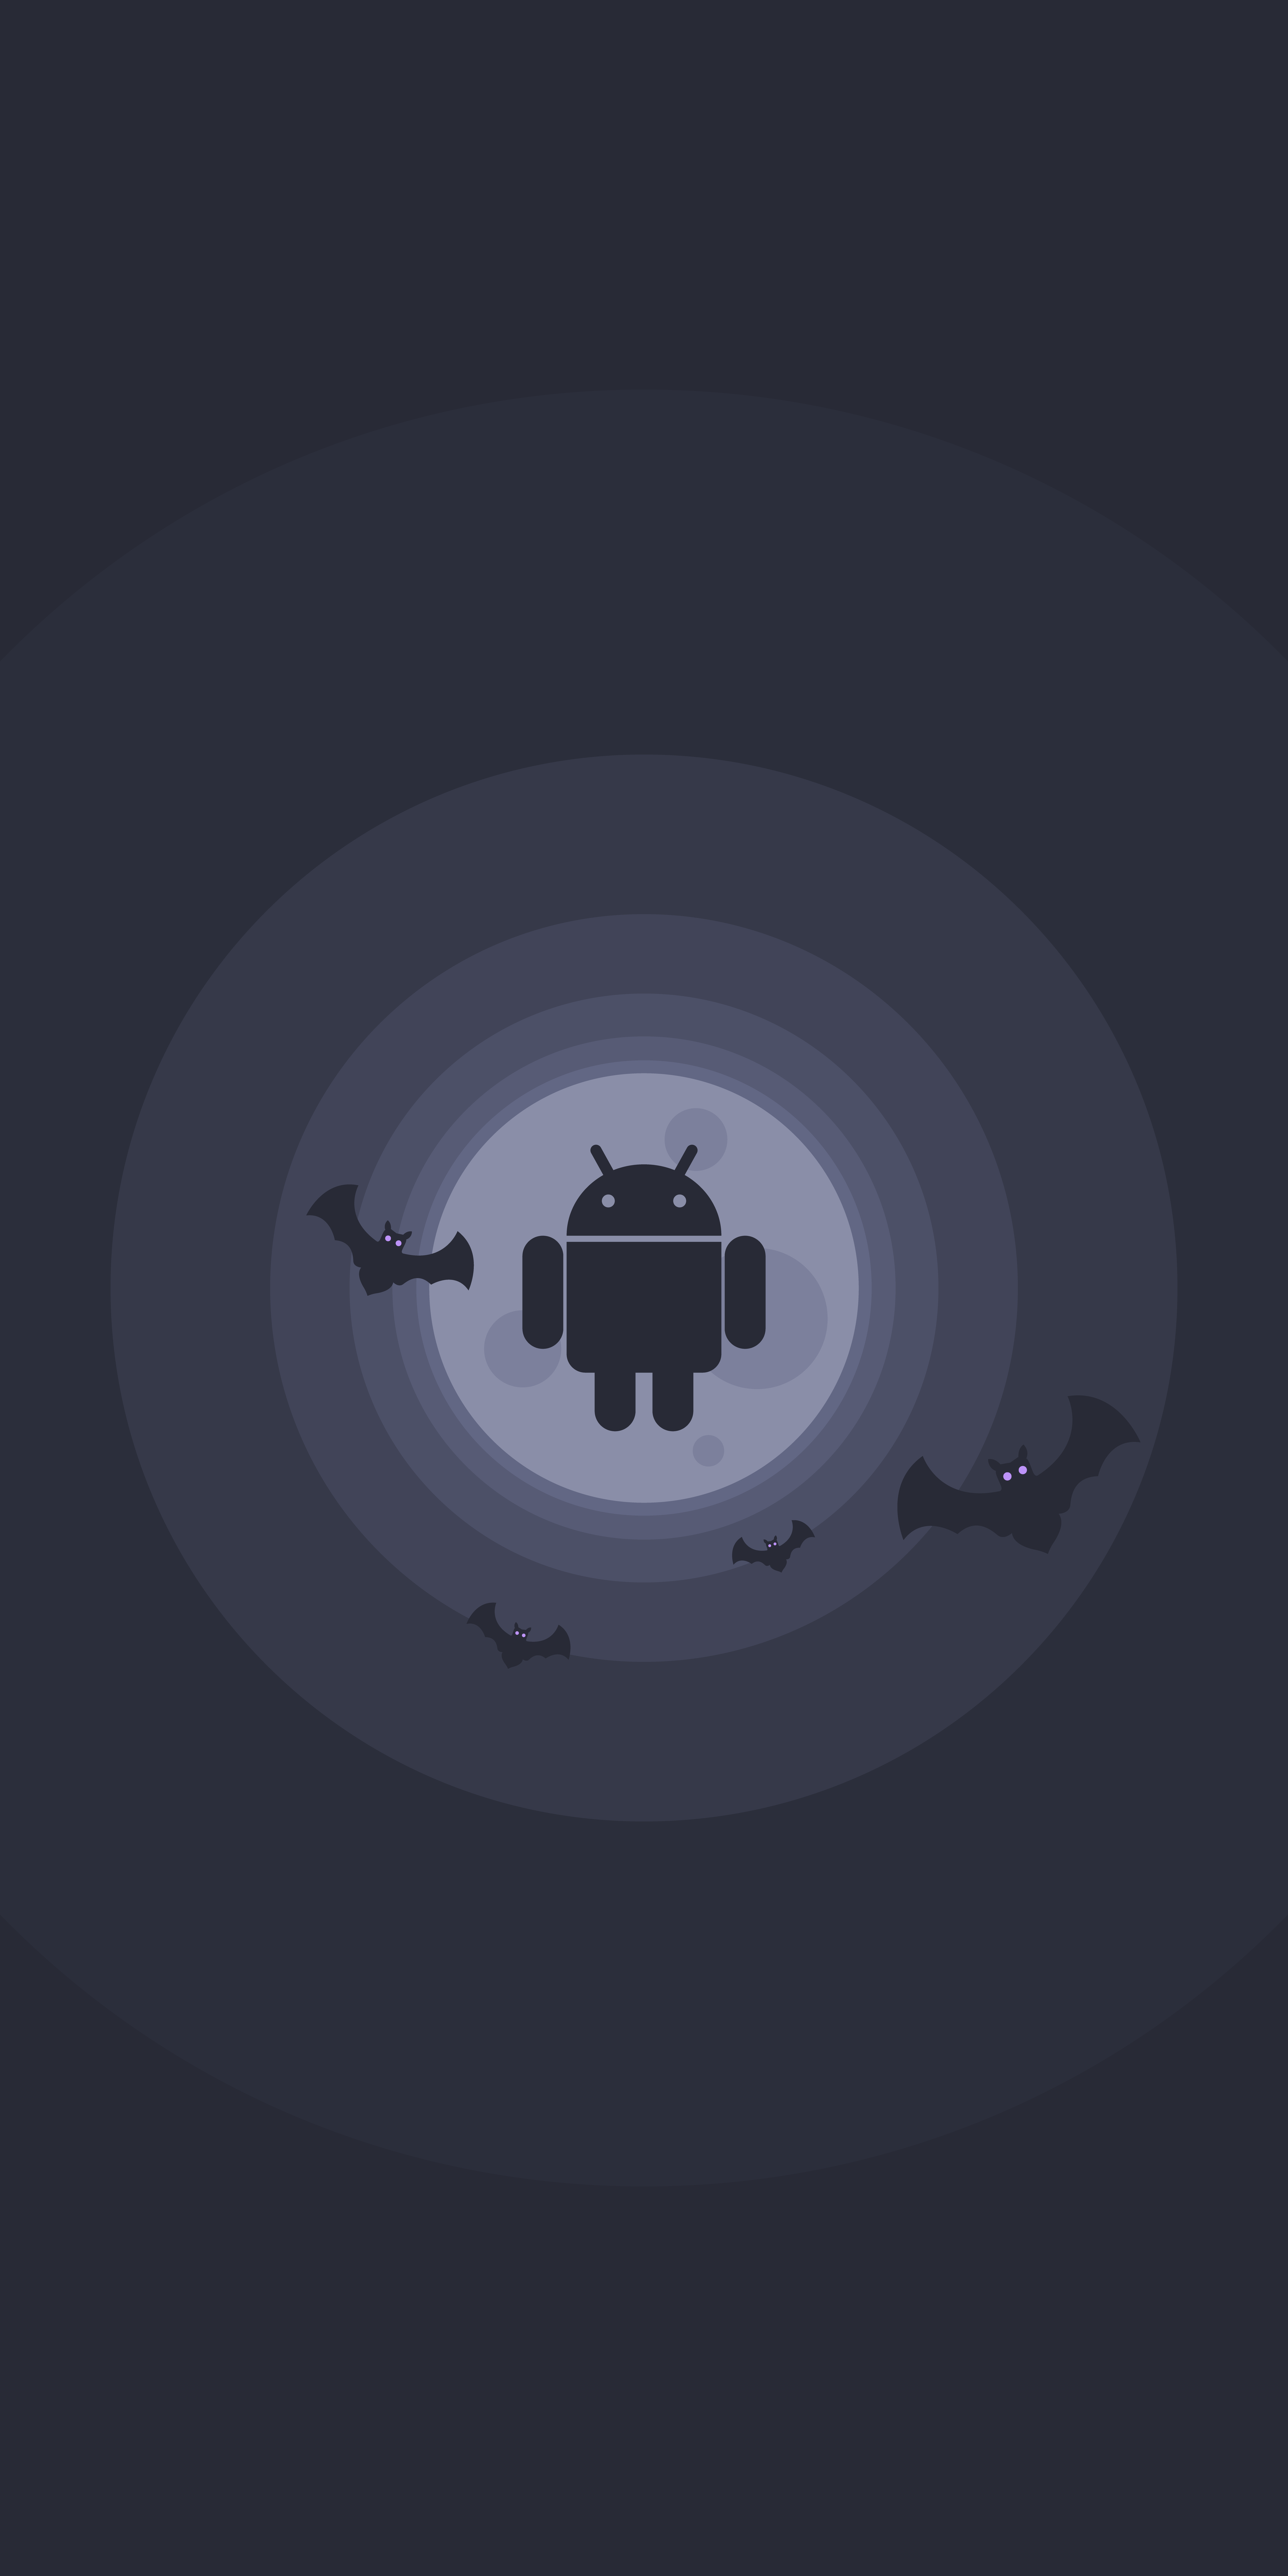 Android Operating System Dracula Theme Bats Robot Minimalism Vertical 6000x12000